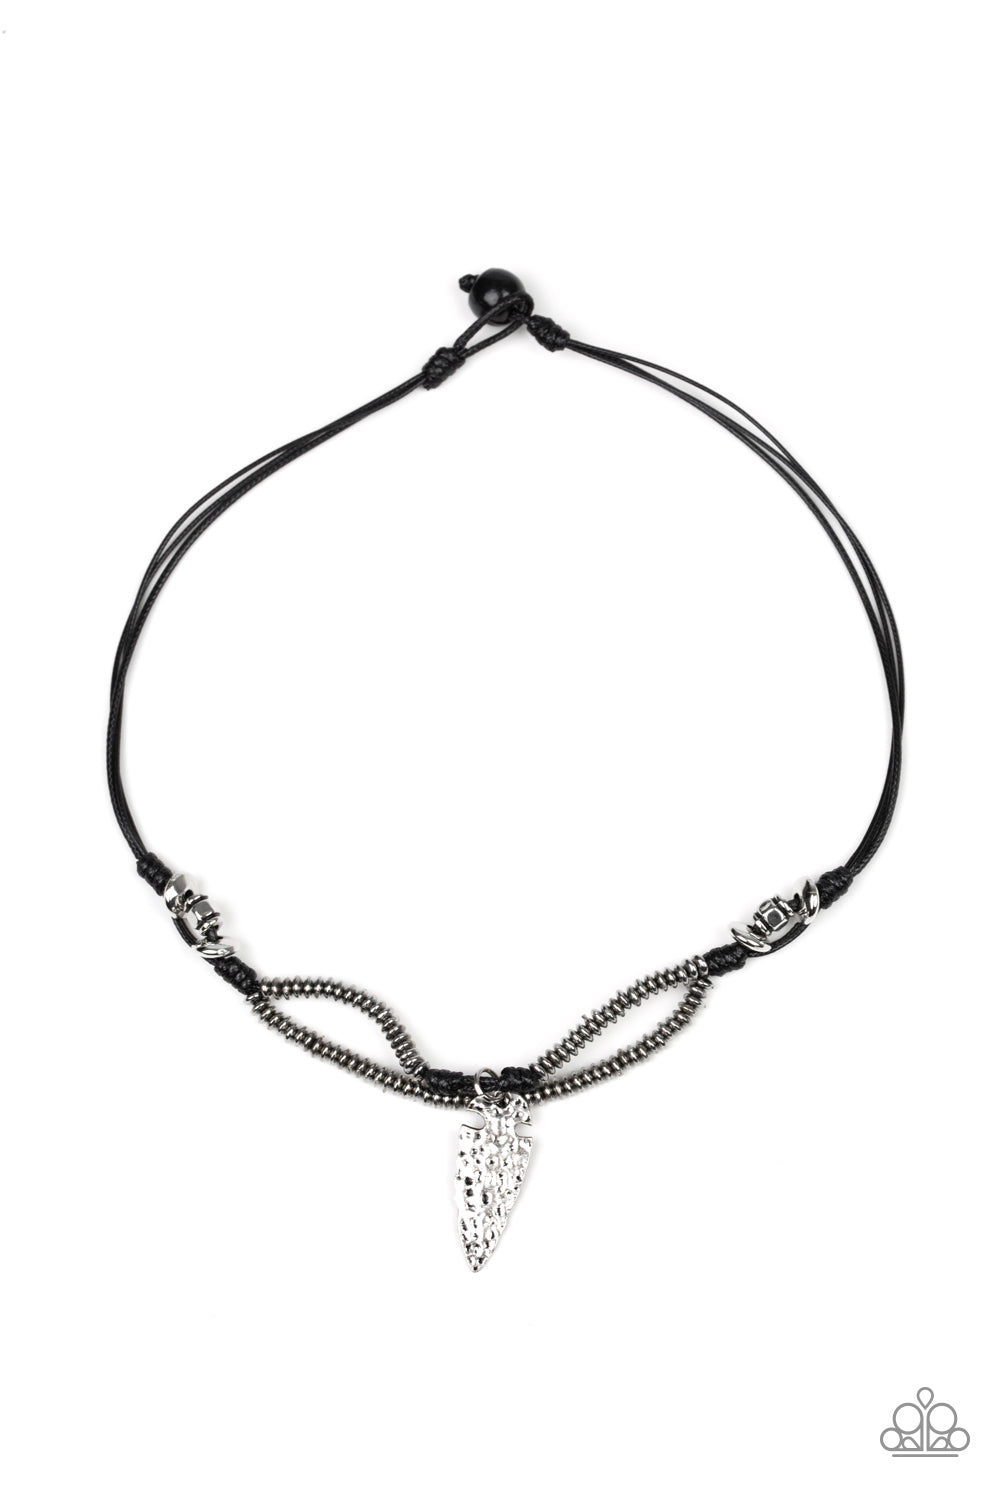 Paparazzi Necklace - Off With His ARROWHEAD - Black